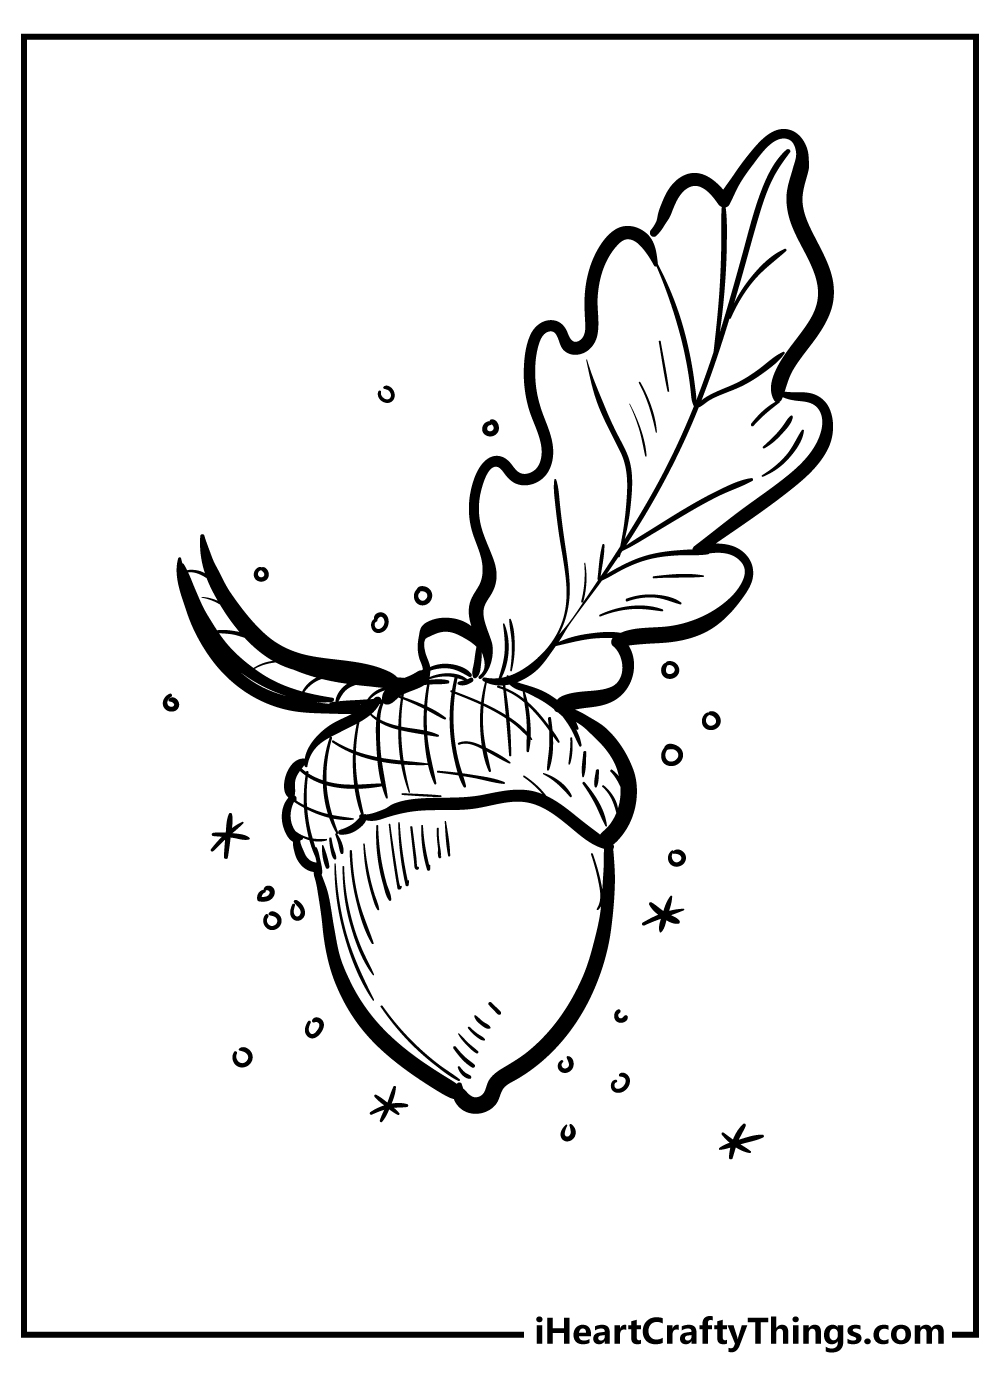 Acorn coloring pages free printables